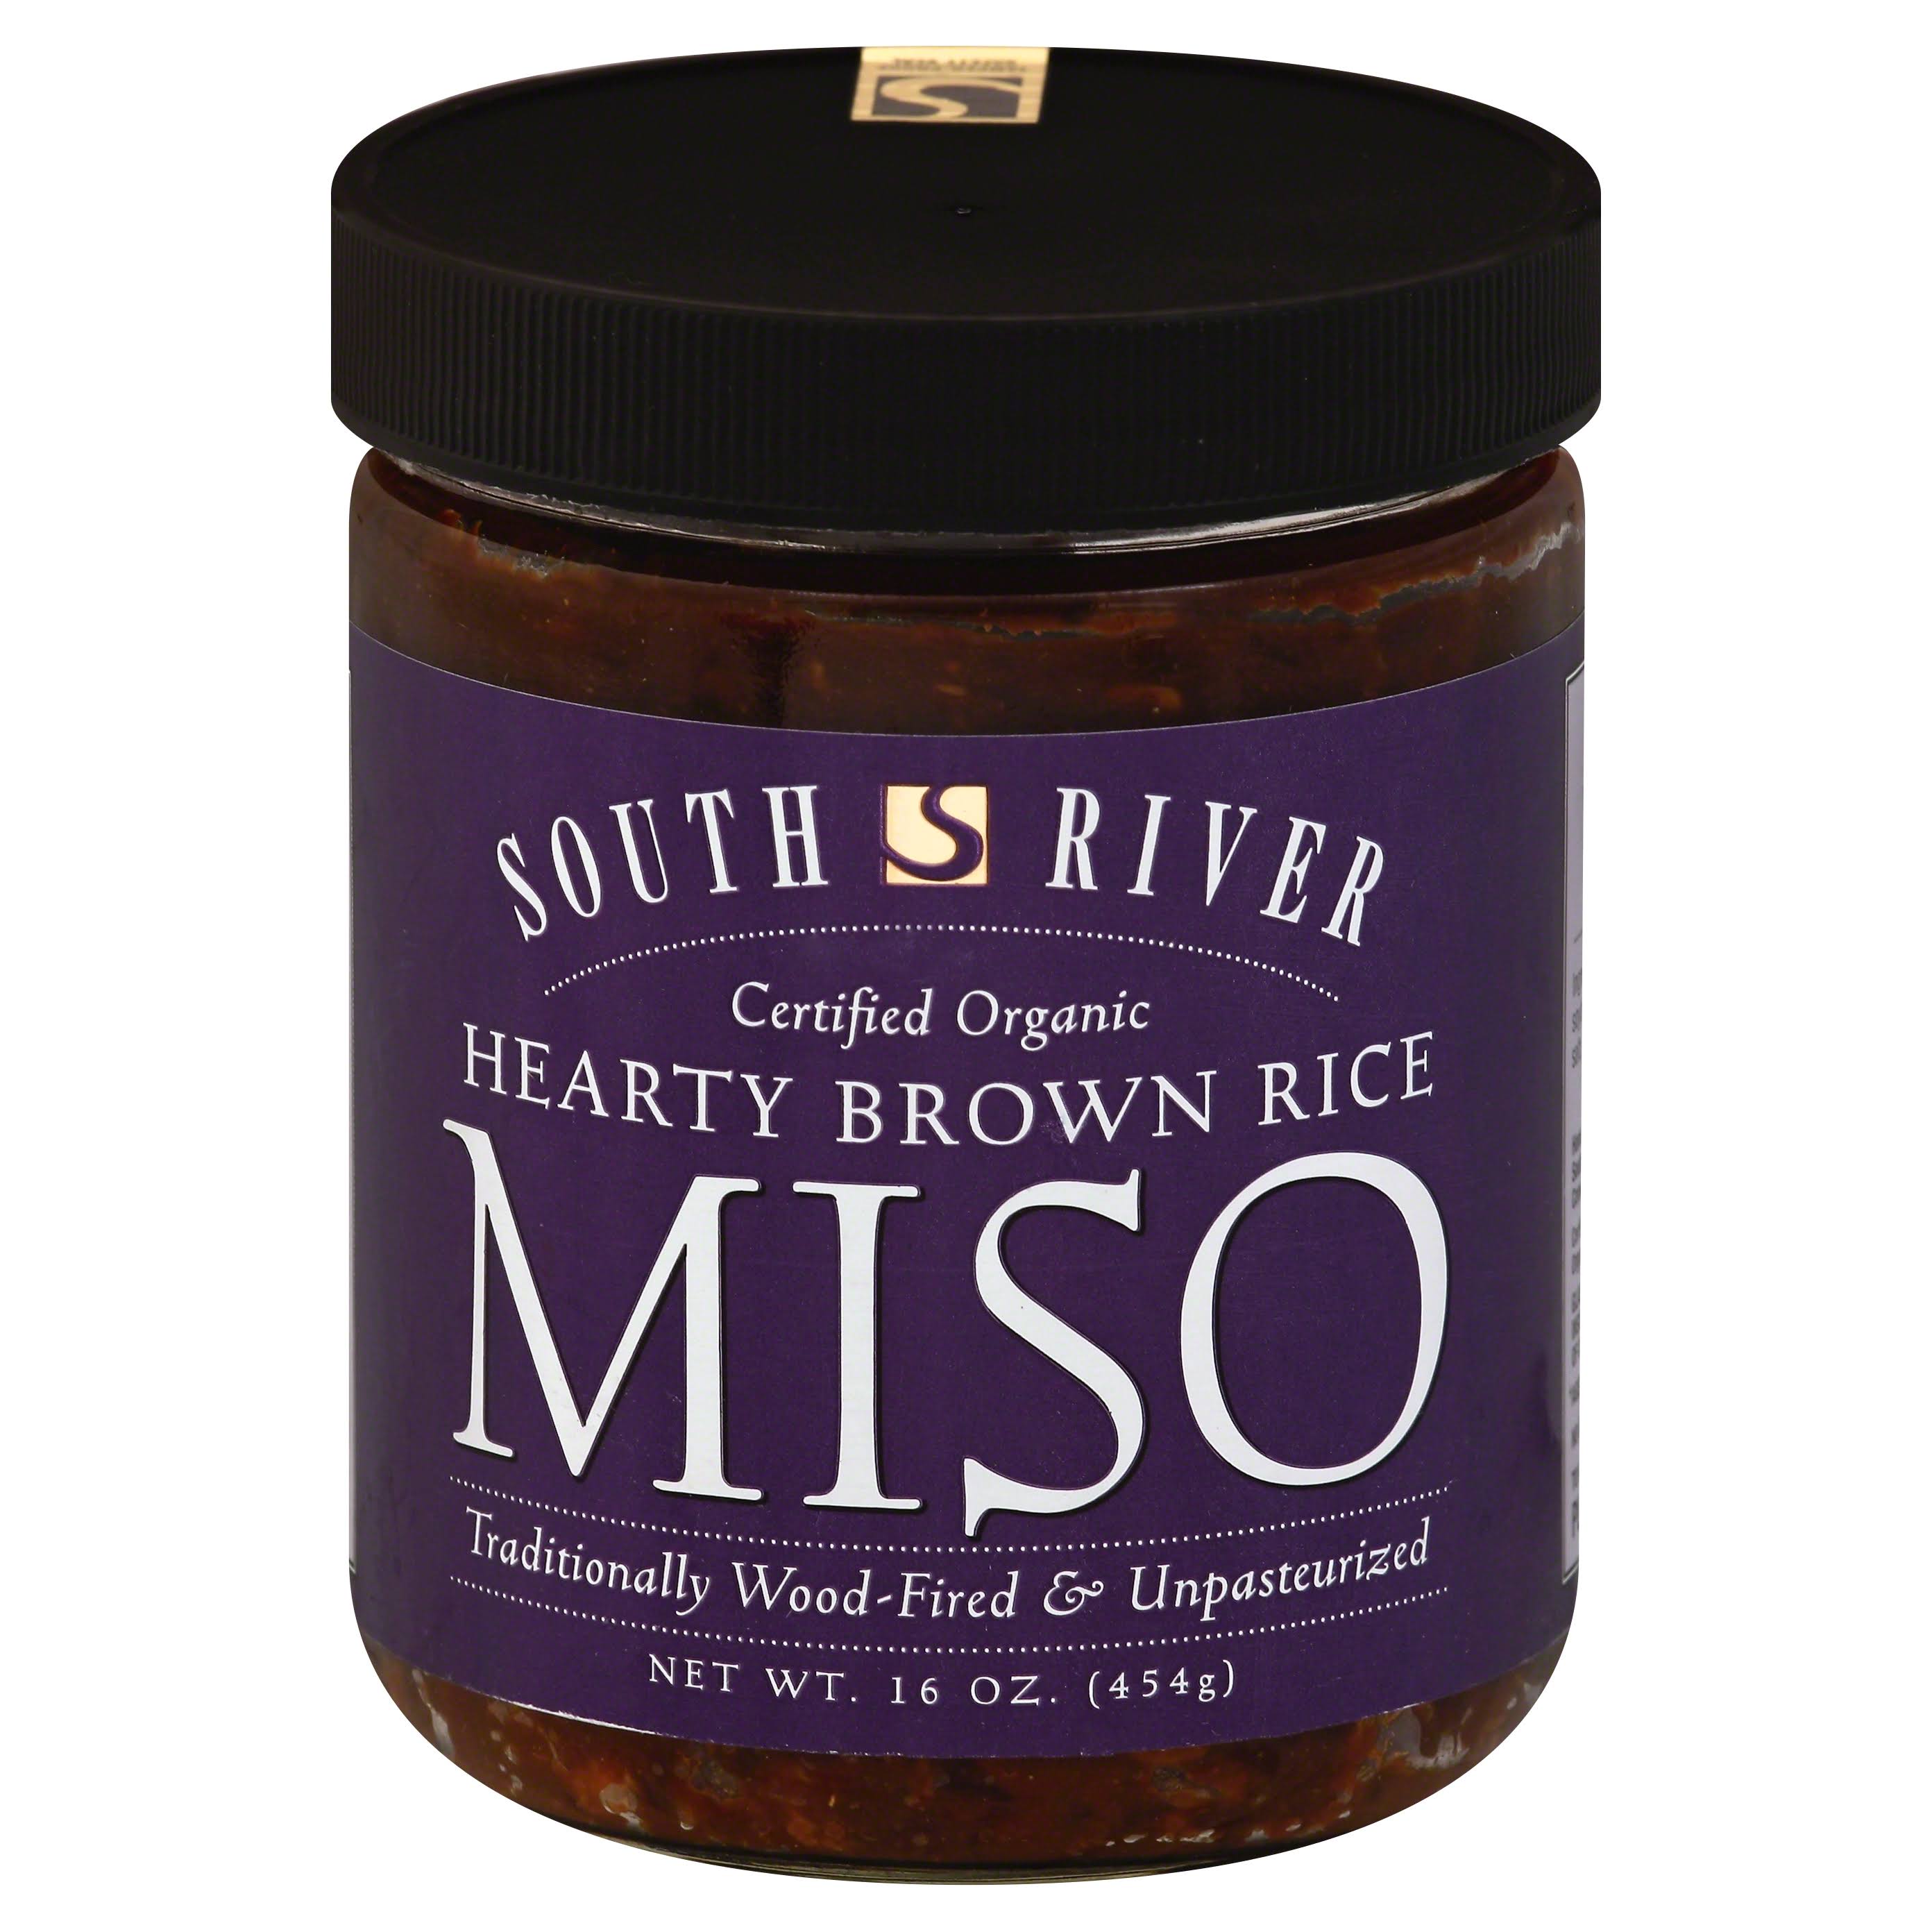 South River Hearty Brown Rice Miso - 16 oz jar